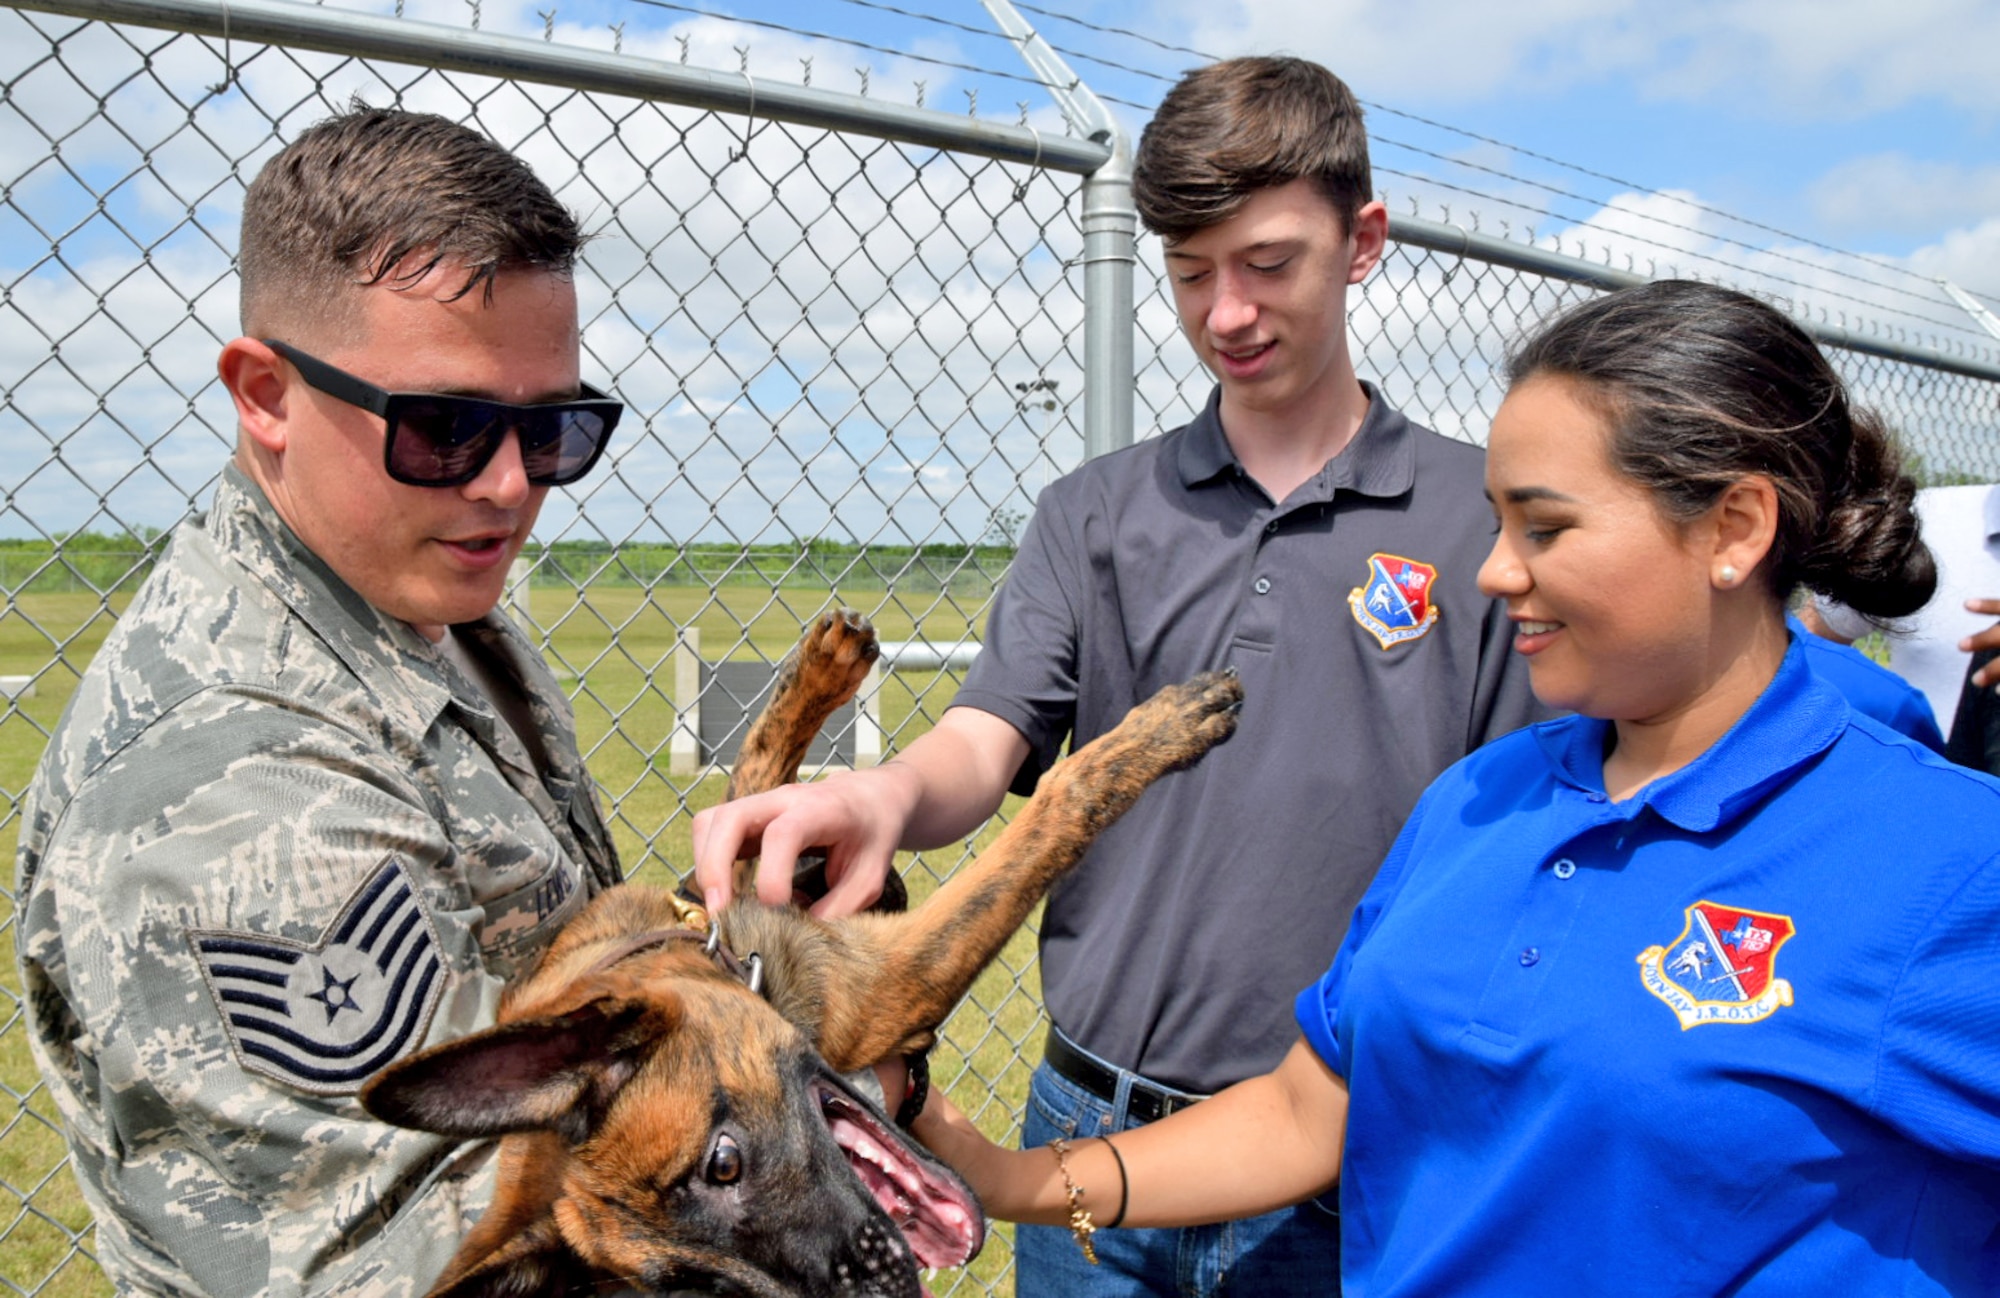 John Jay High School Air Force Junior Reserve Officer Training Corp cadets Jackson Getz and Shadicy Garza pet Delarge, a puppy from the Military Working Dog program held by Tech. Sgt. Nicholas Lewis, an 802nd Security Force Squadron military working dog handler , April 19, 2017 at Joint Base San Antonio-Lackland, Texas. The students toured engine and structural engineering shops at the 433rd Airlift Wing. (U.S. Air Force photo by Tech. Sgt. Carlos J. Trevino) (released)